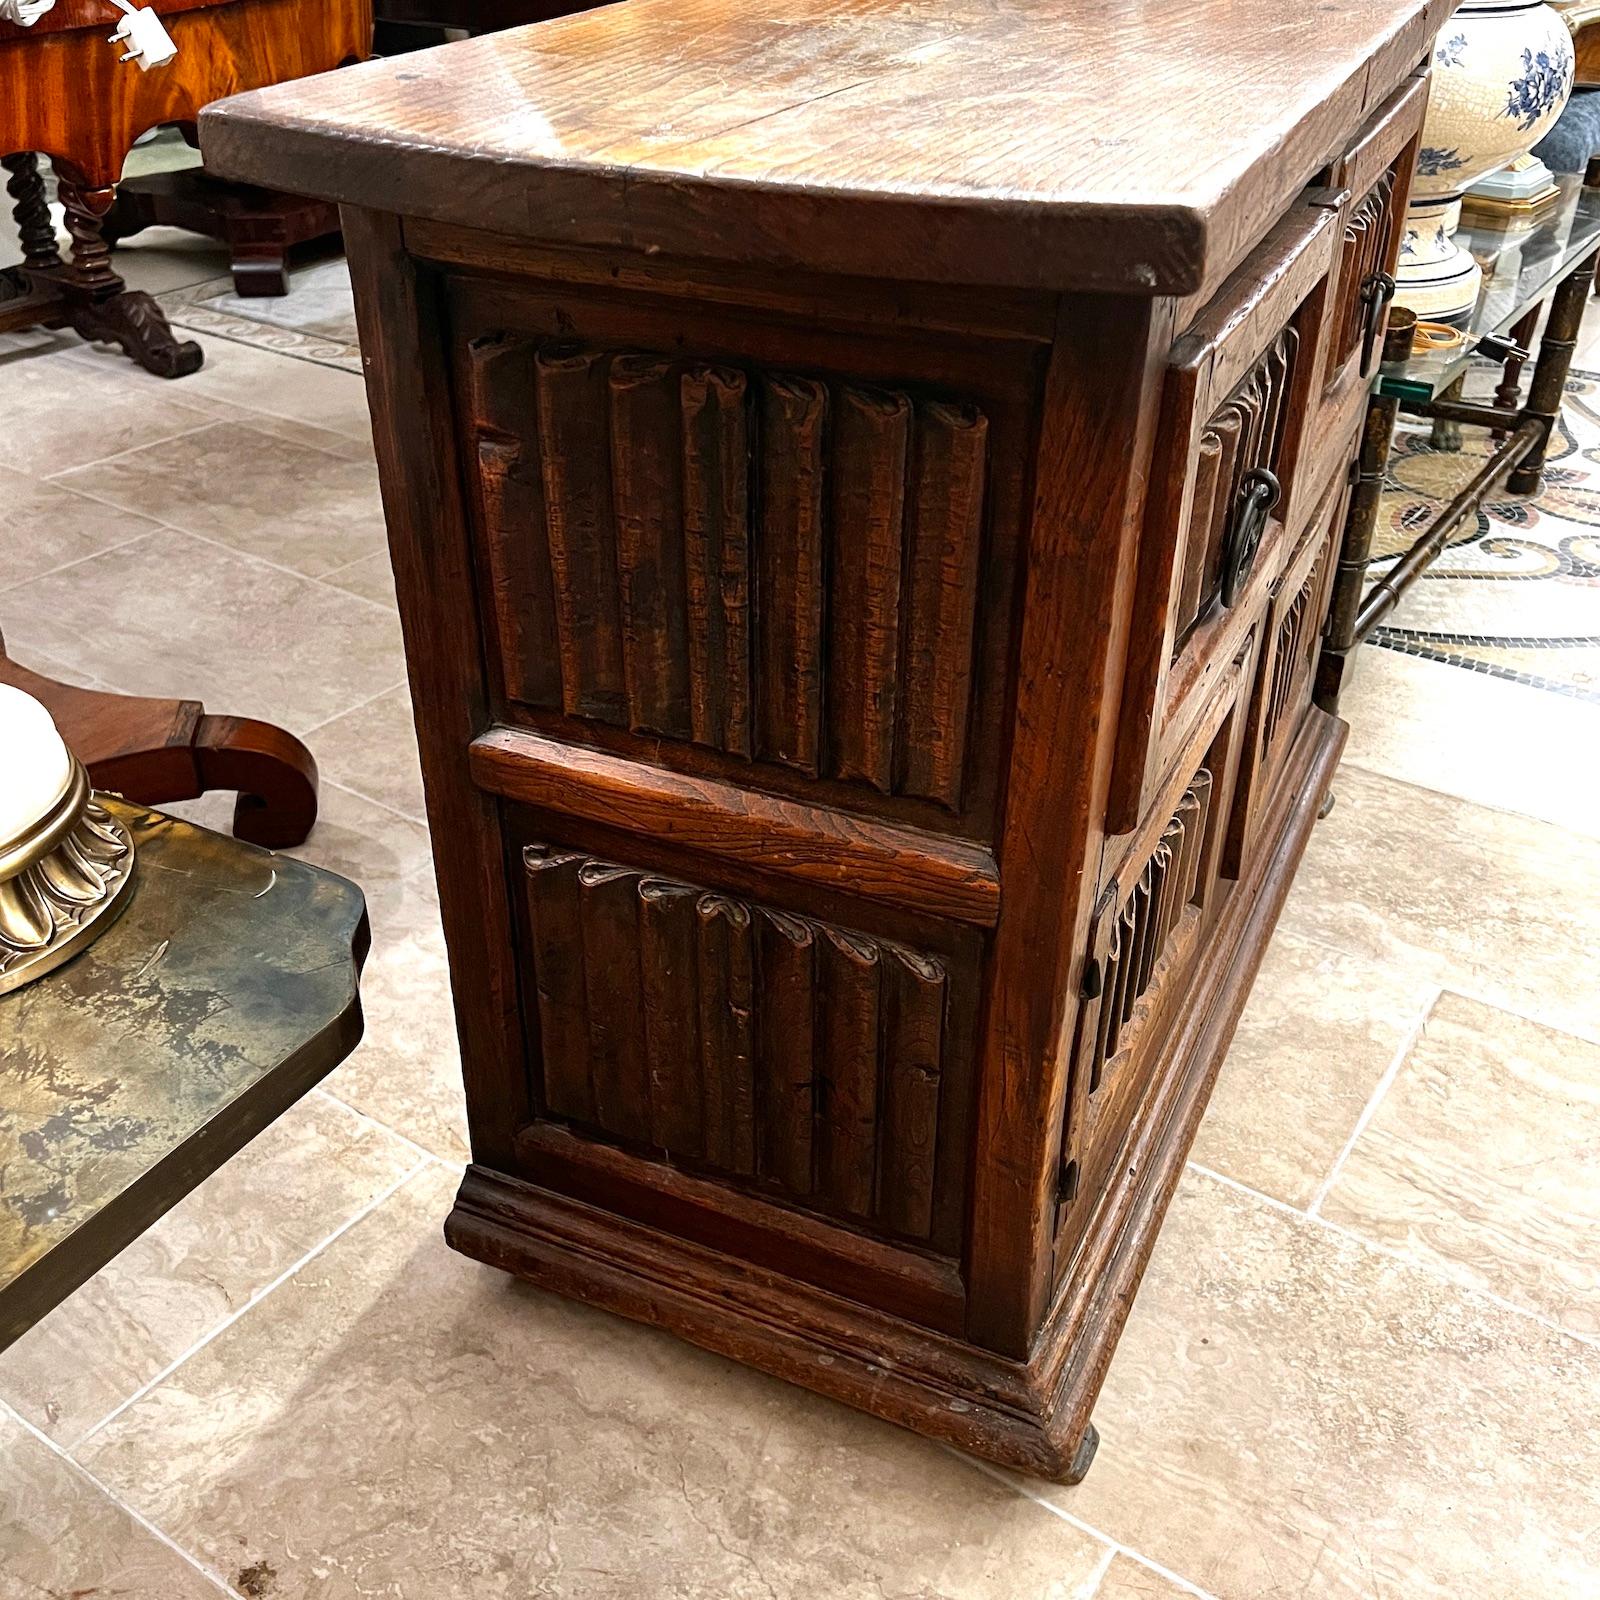 Antique Spanish circa 1920s carved wood cabinet with 2 drawers and 2 doors.

Measurements:
Height: 31
Length: 41